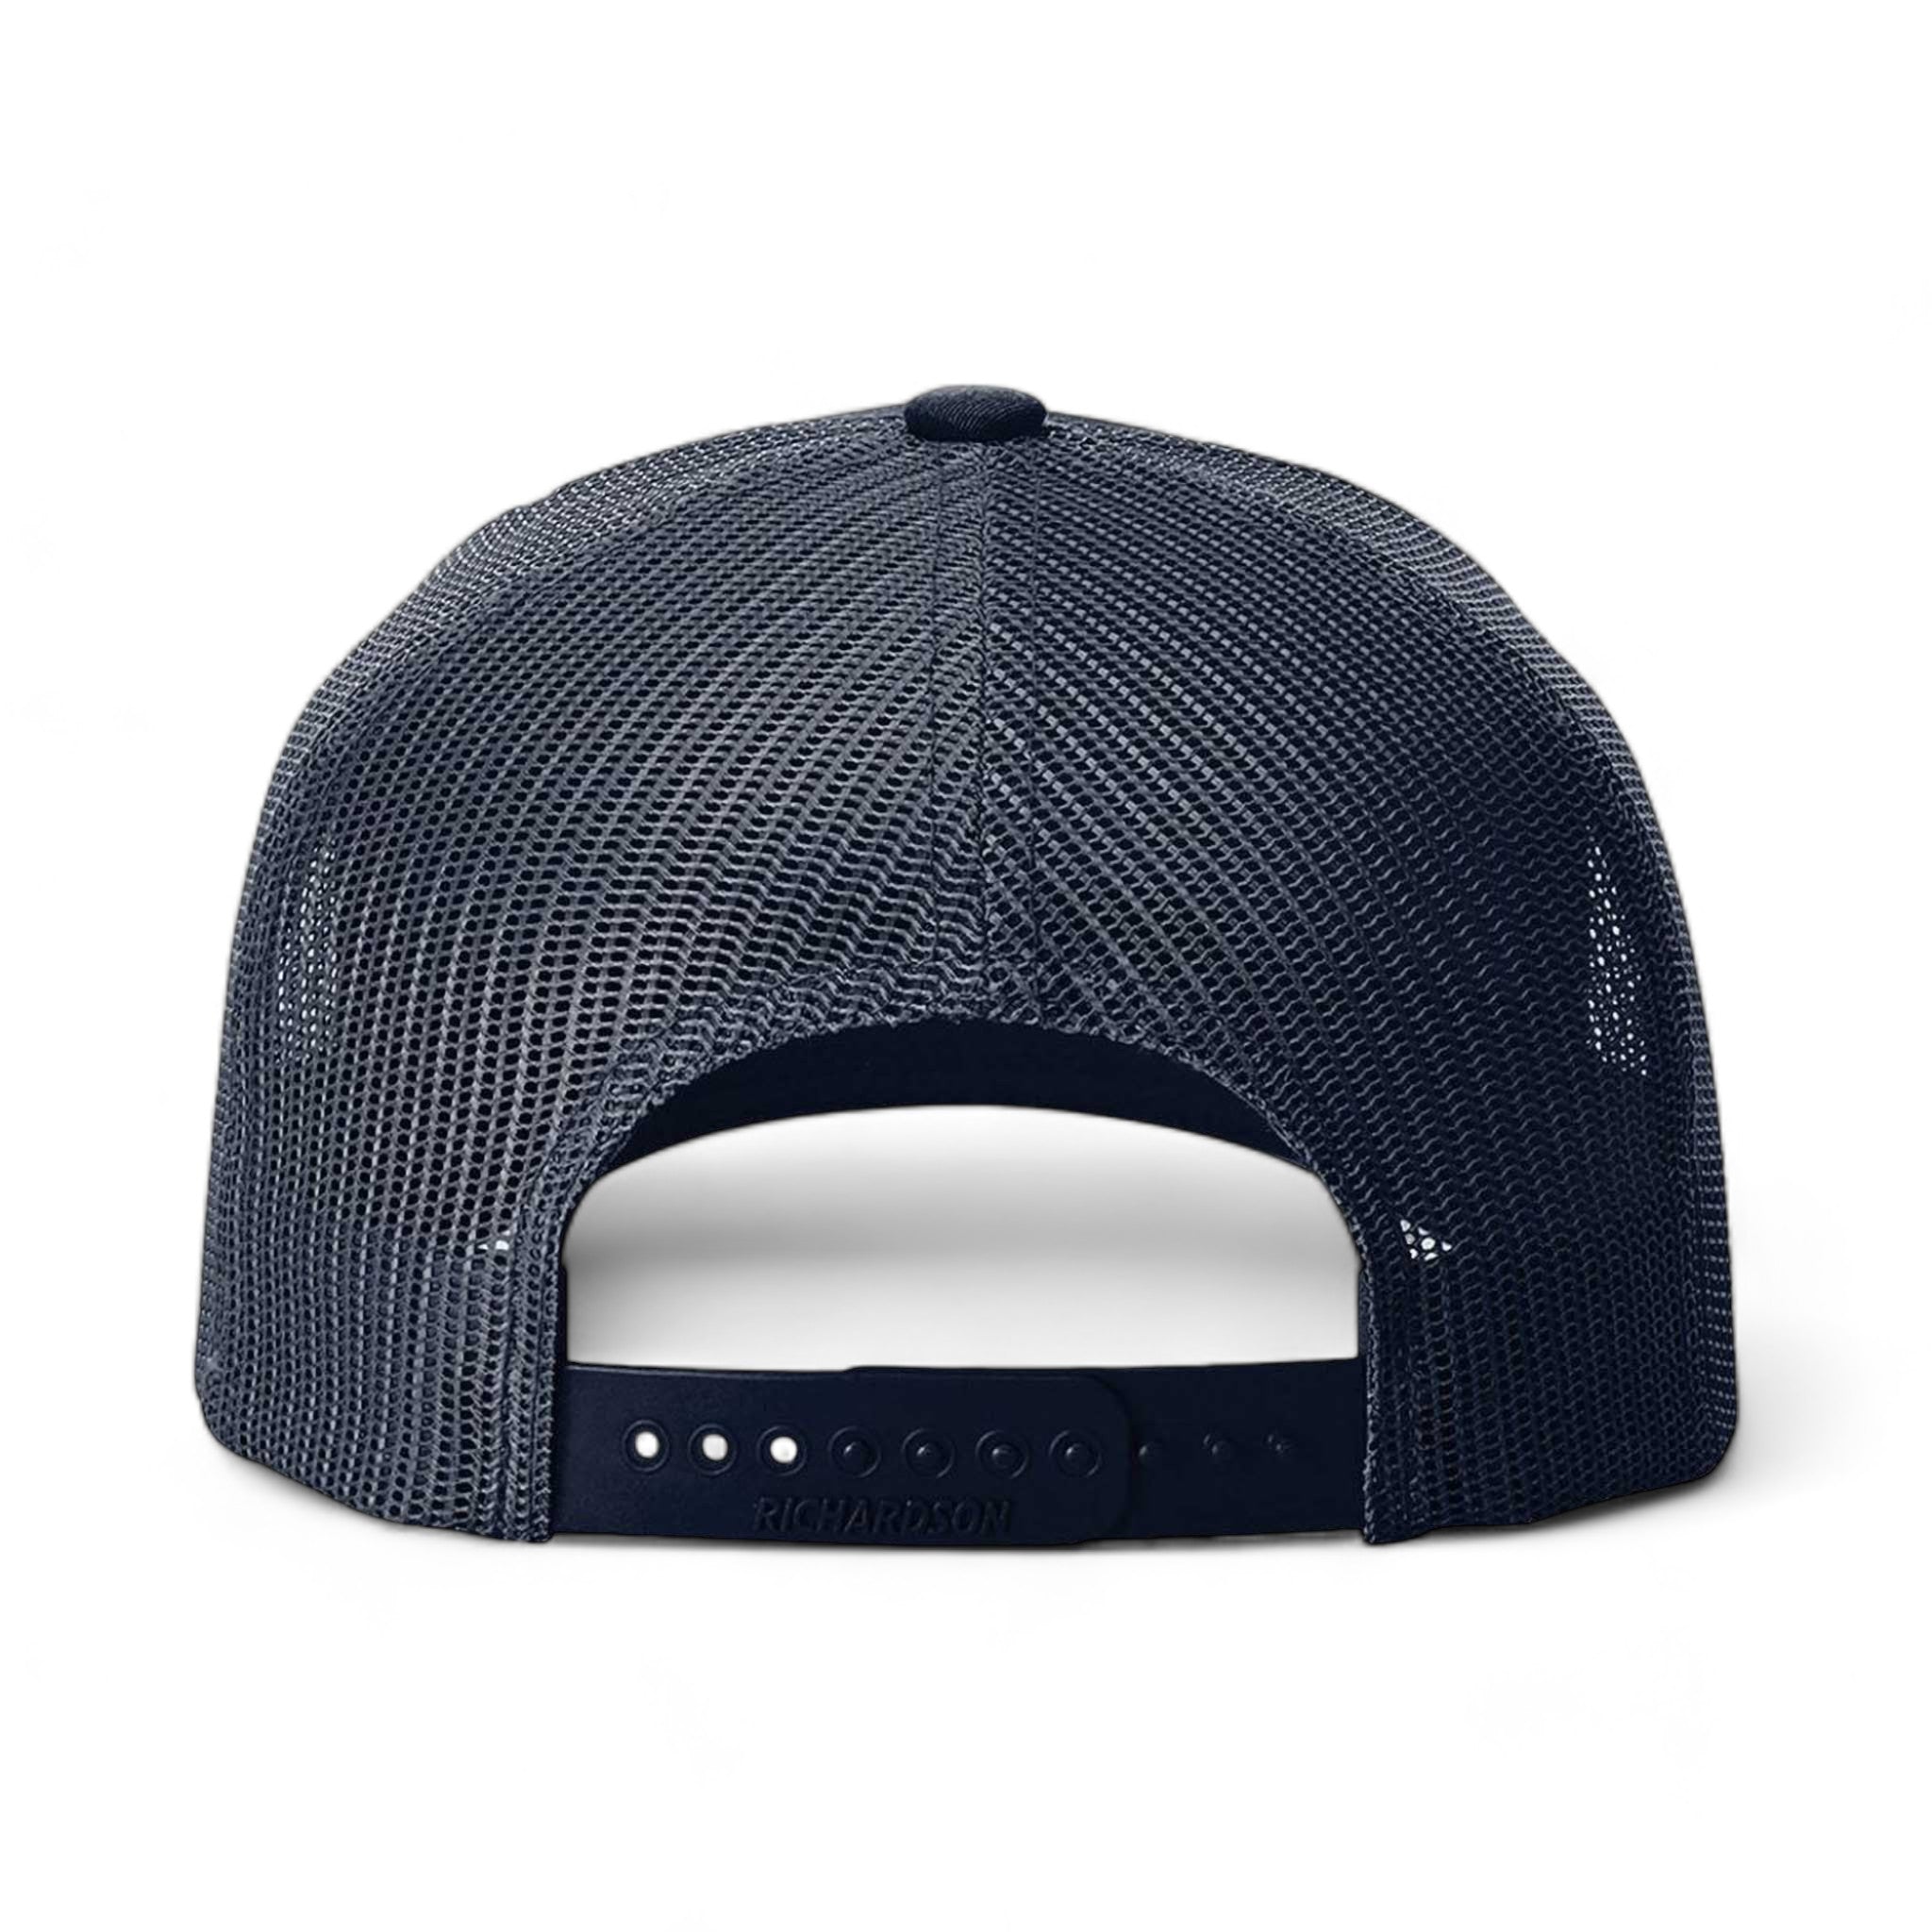 Back view of Richardson 112FPR custom hat in navy and white